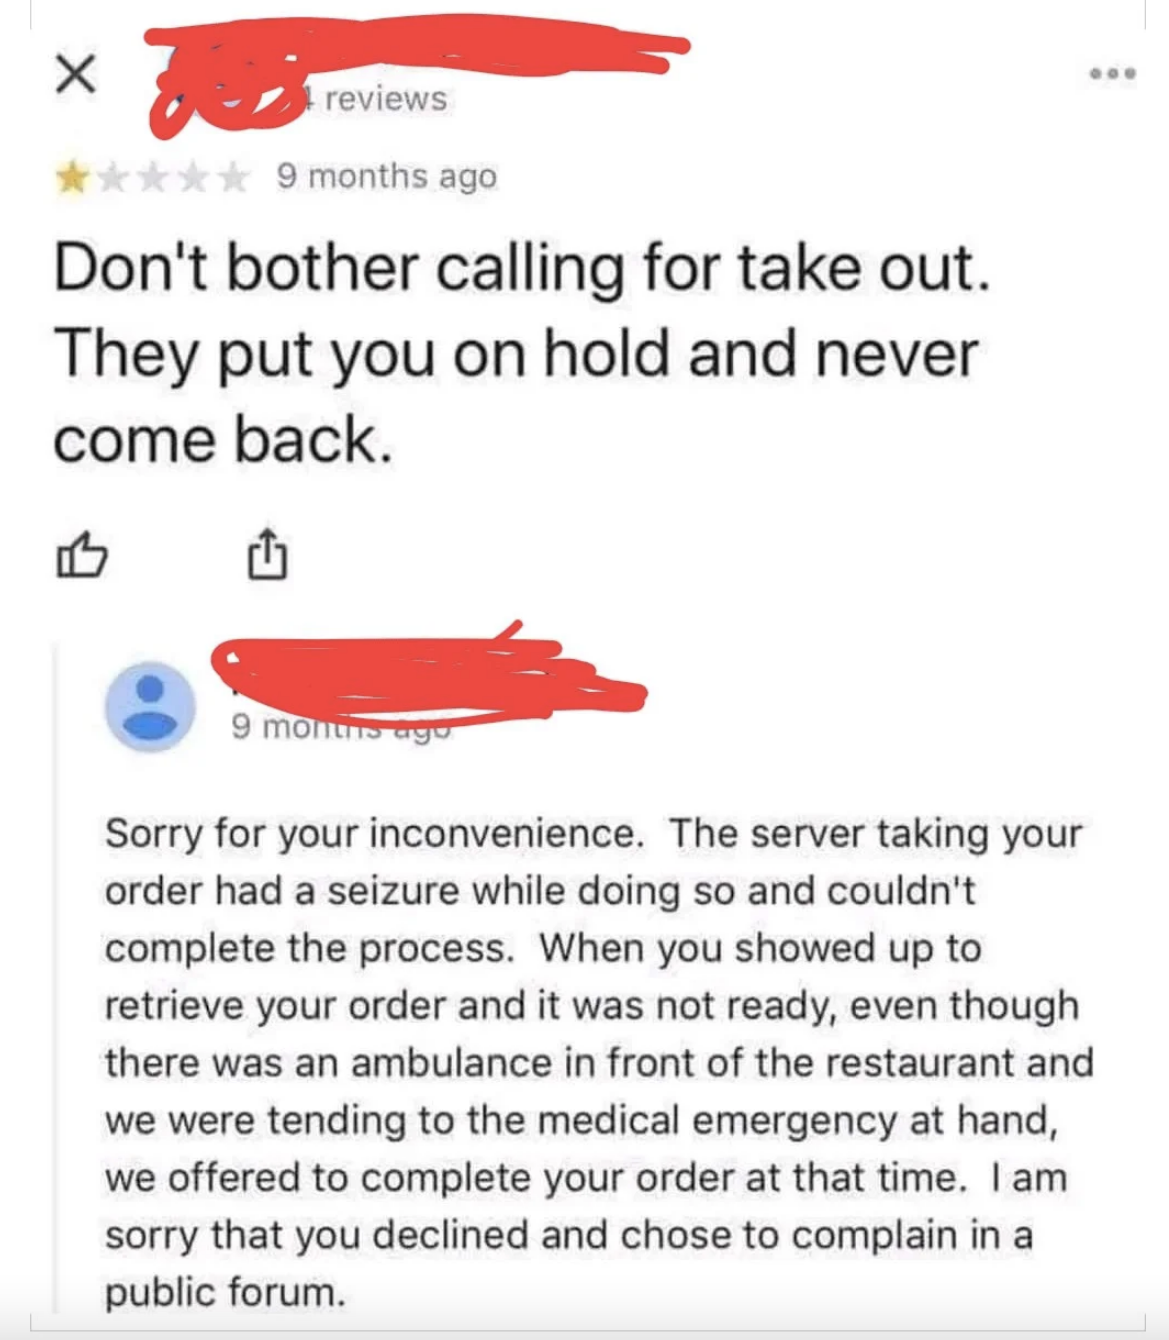 In response to 1-star review saying not to bother ordering takeout &#x27;cause they take forever, the restaurant posted an apology, saying they offered to finish the order when the customer arrived and saw the ambulance, but the customer declined